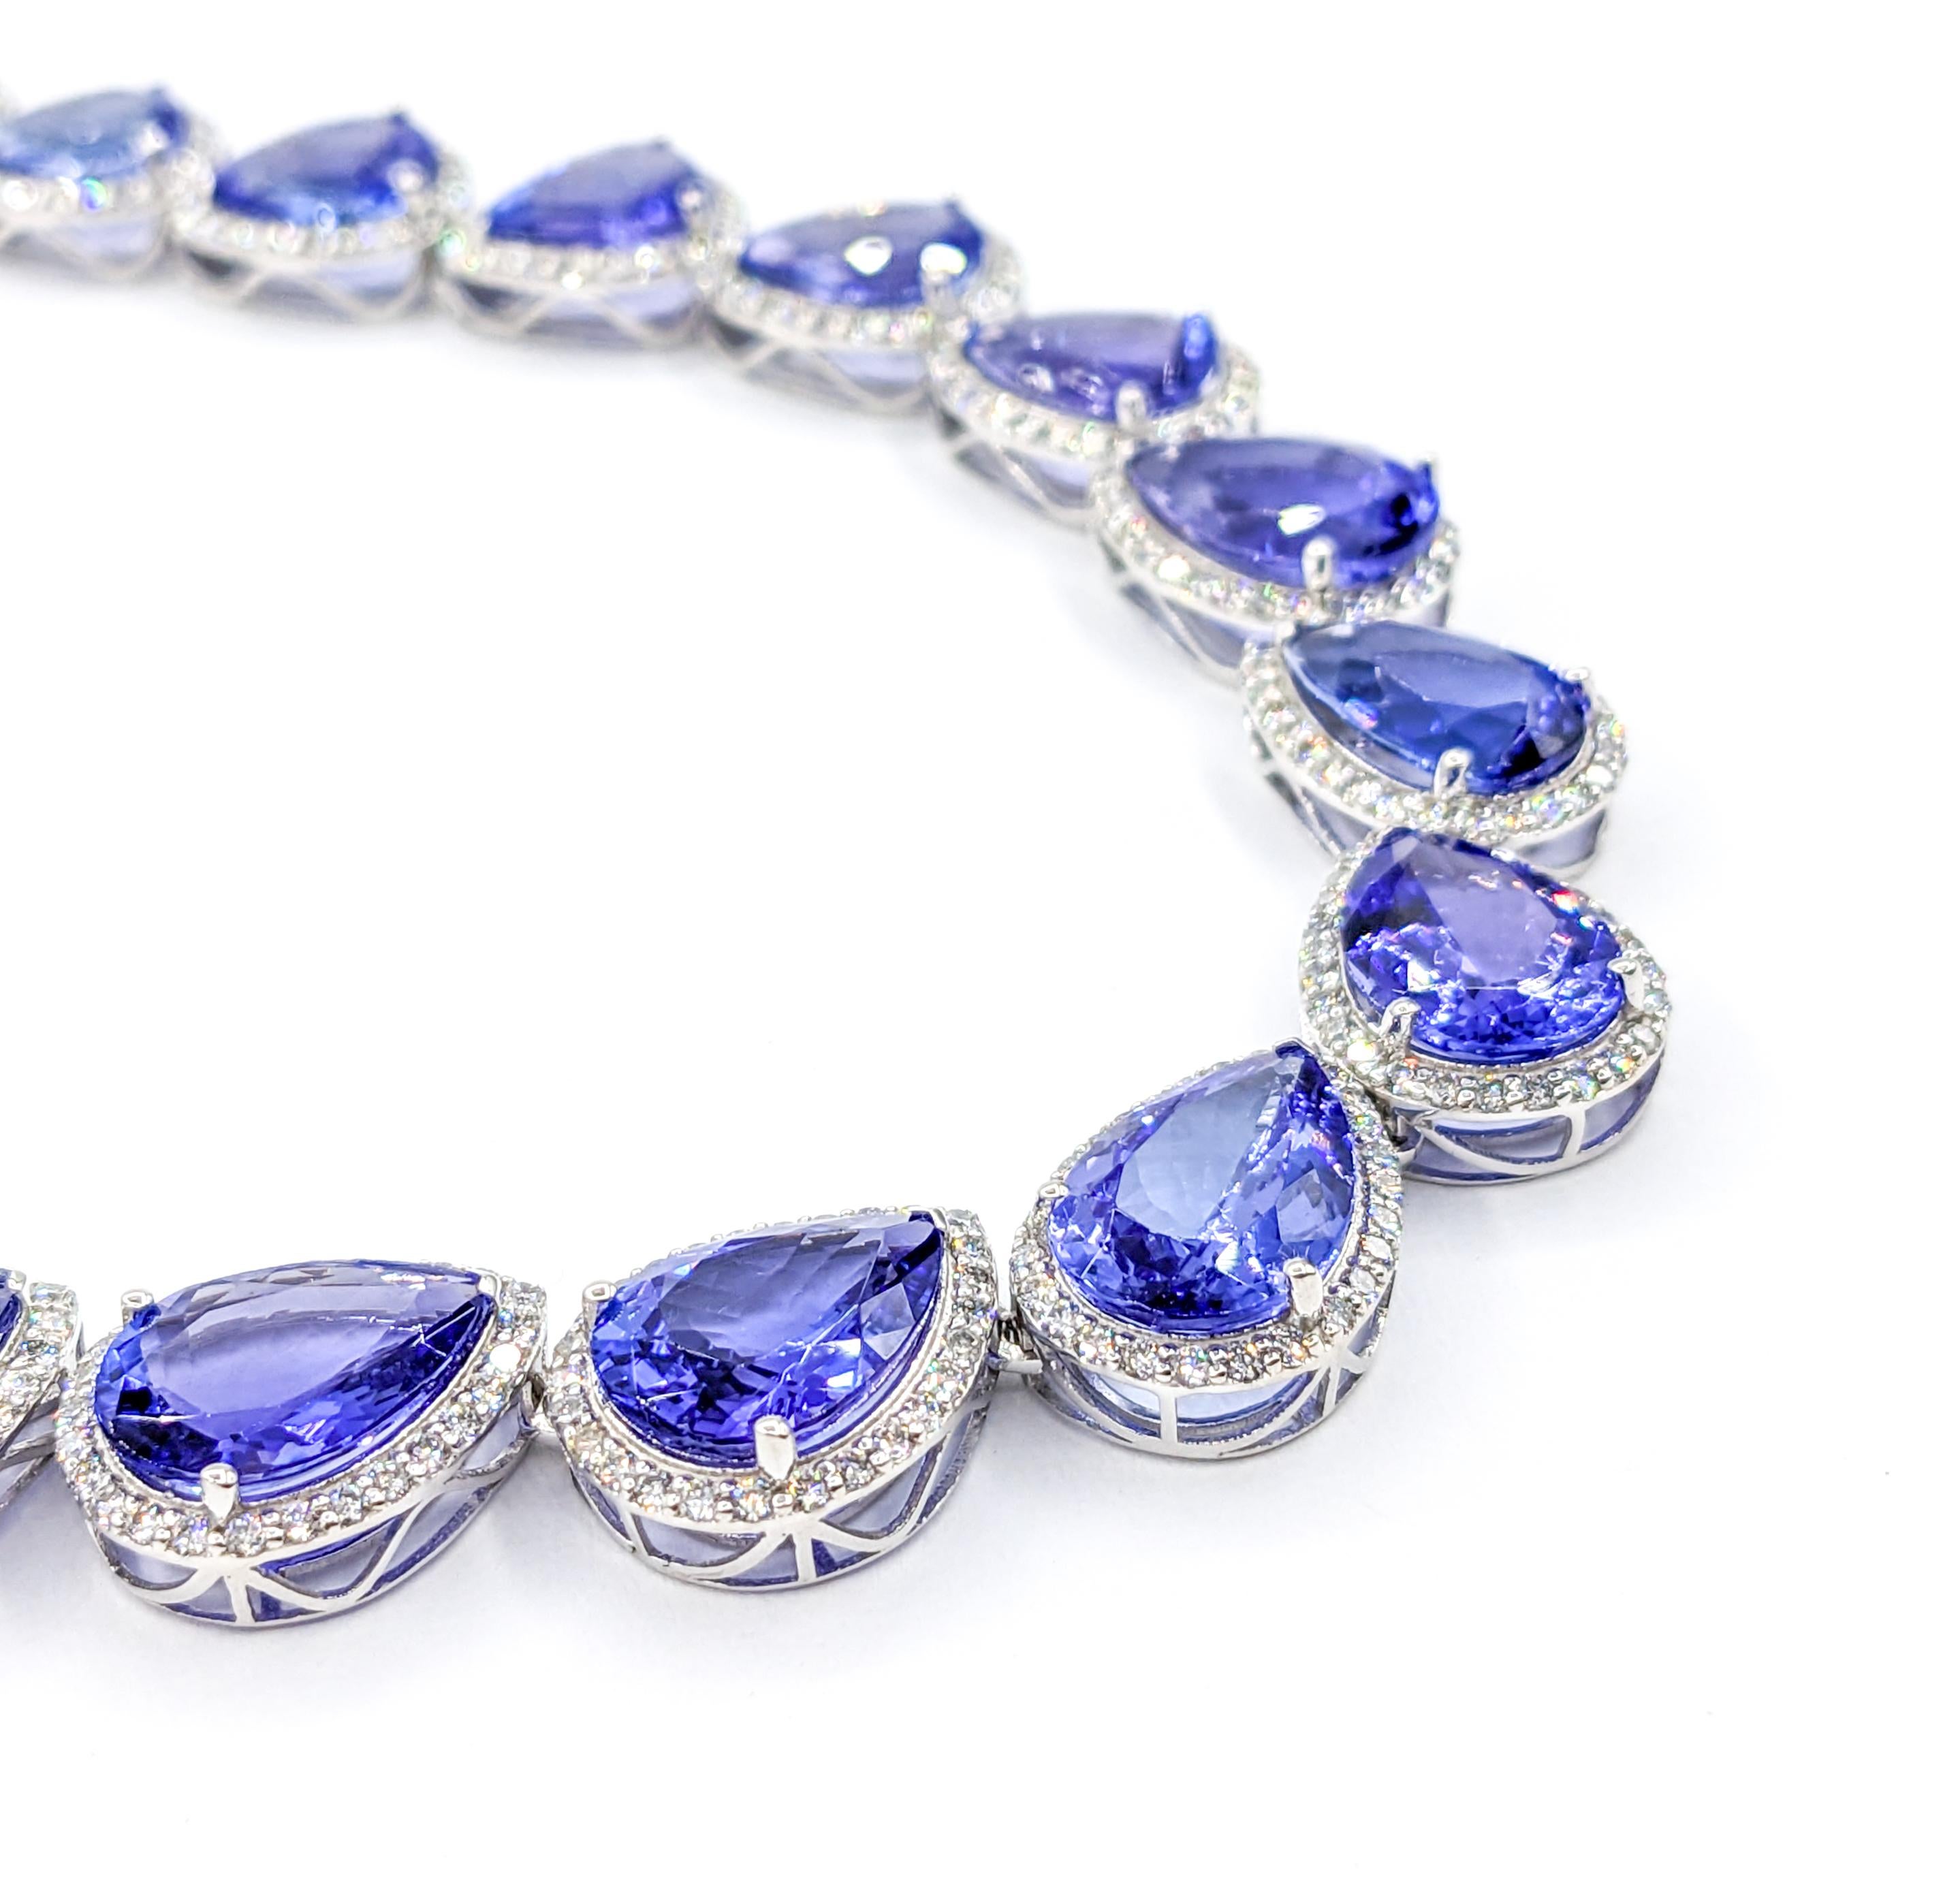 89ctw Tanzanite & Diamond Necklace White Gold

Introducing this exquisite Necklace, a masterpiece crafted in 14kt white gold, featuring a stunning array of diamonds totaling 3.43 carats. These sparkling diamonds boast an I clarity and a near